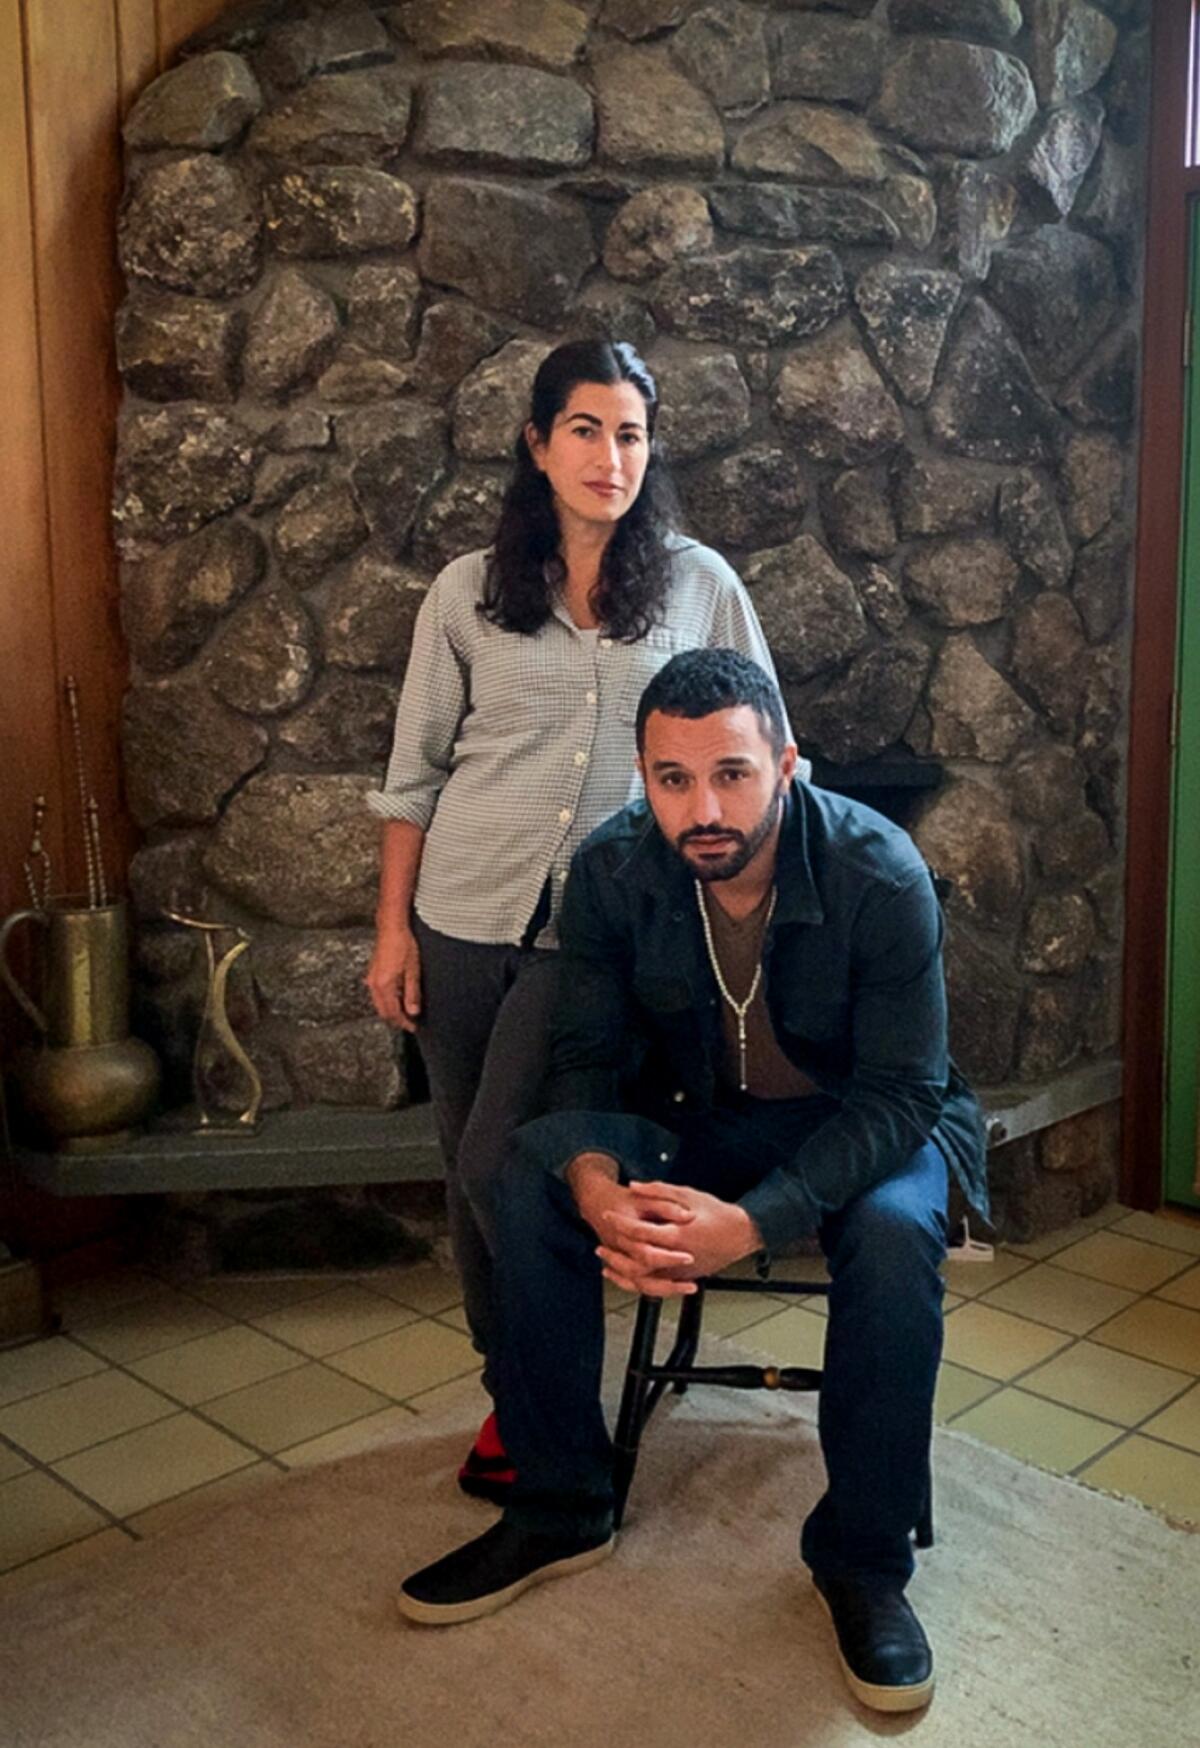 Jehane Noujaim, seated, and Karim Amer in a portrait in front of a fireplace.